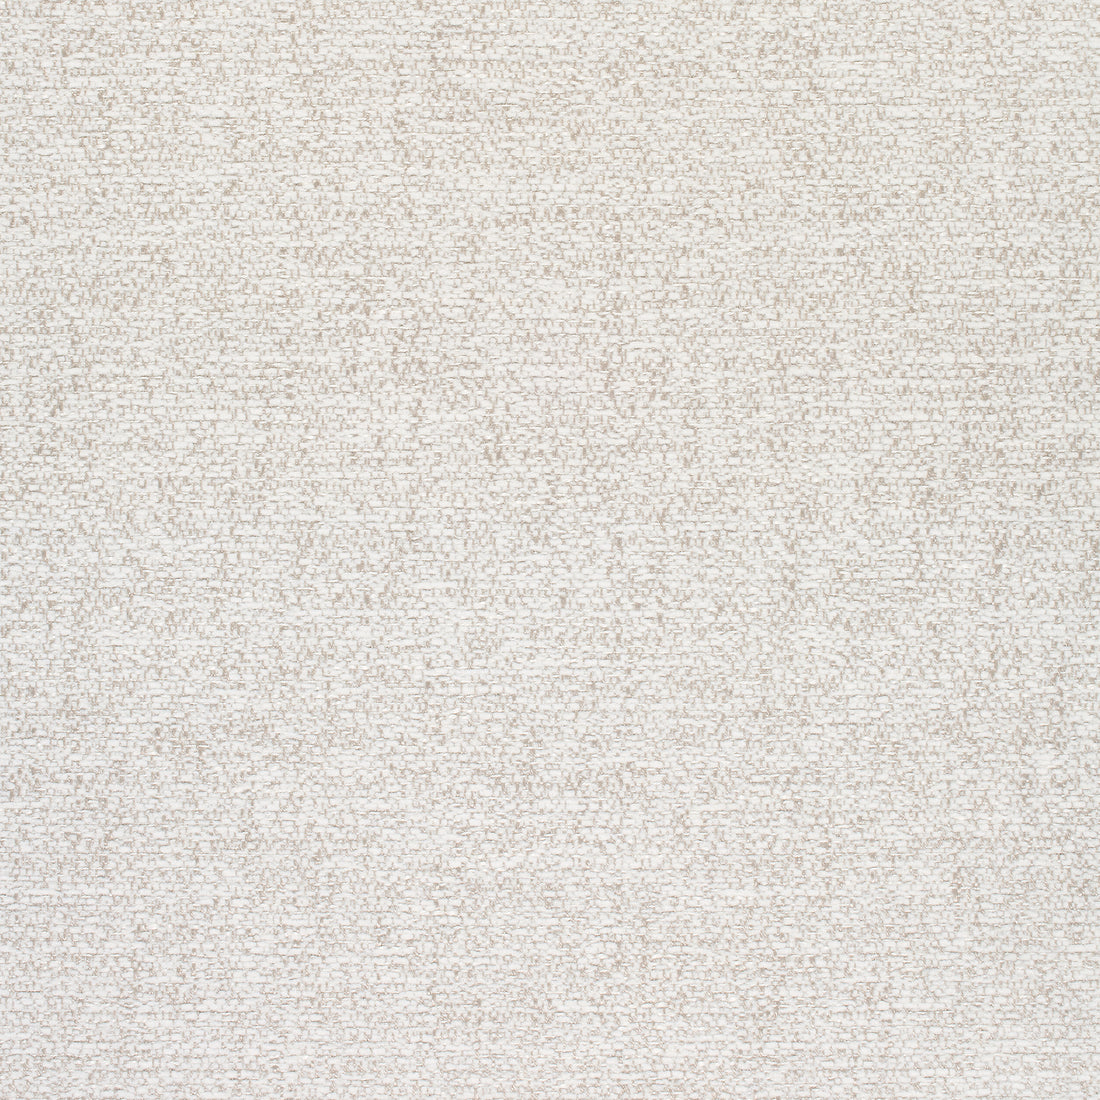 Shiloh fabric in heather linen color - pattern number W789113 - by Thibaut in the Reverie collection